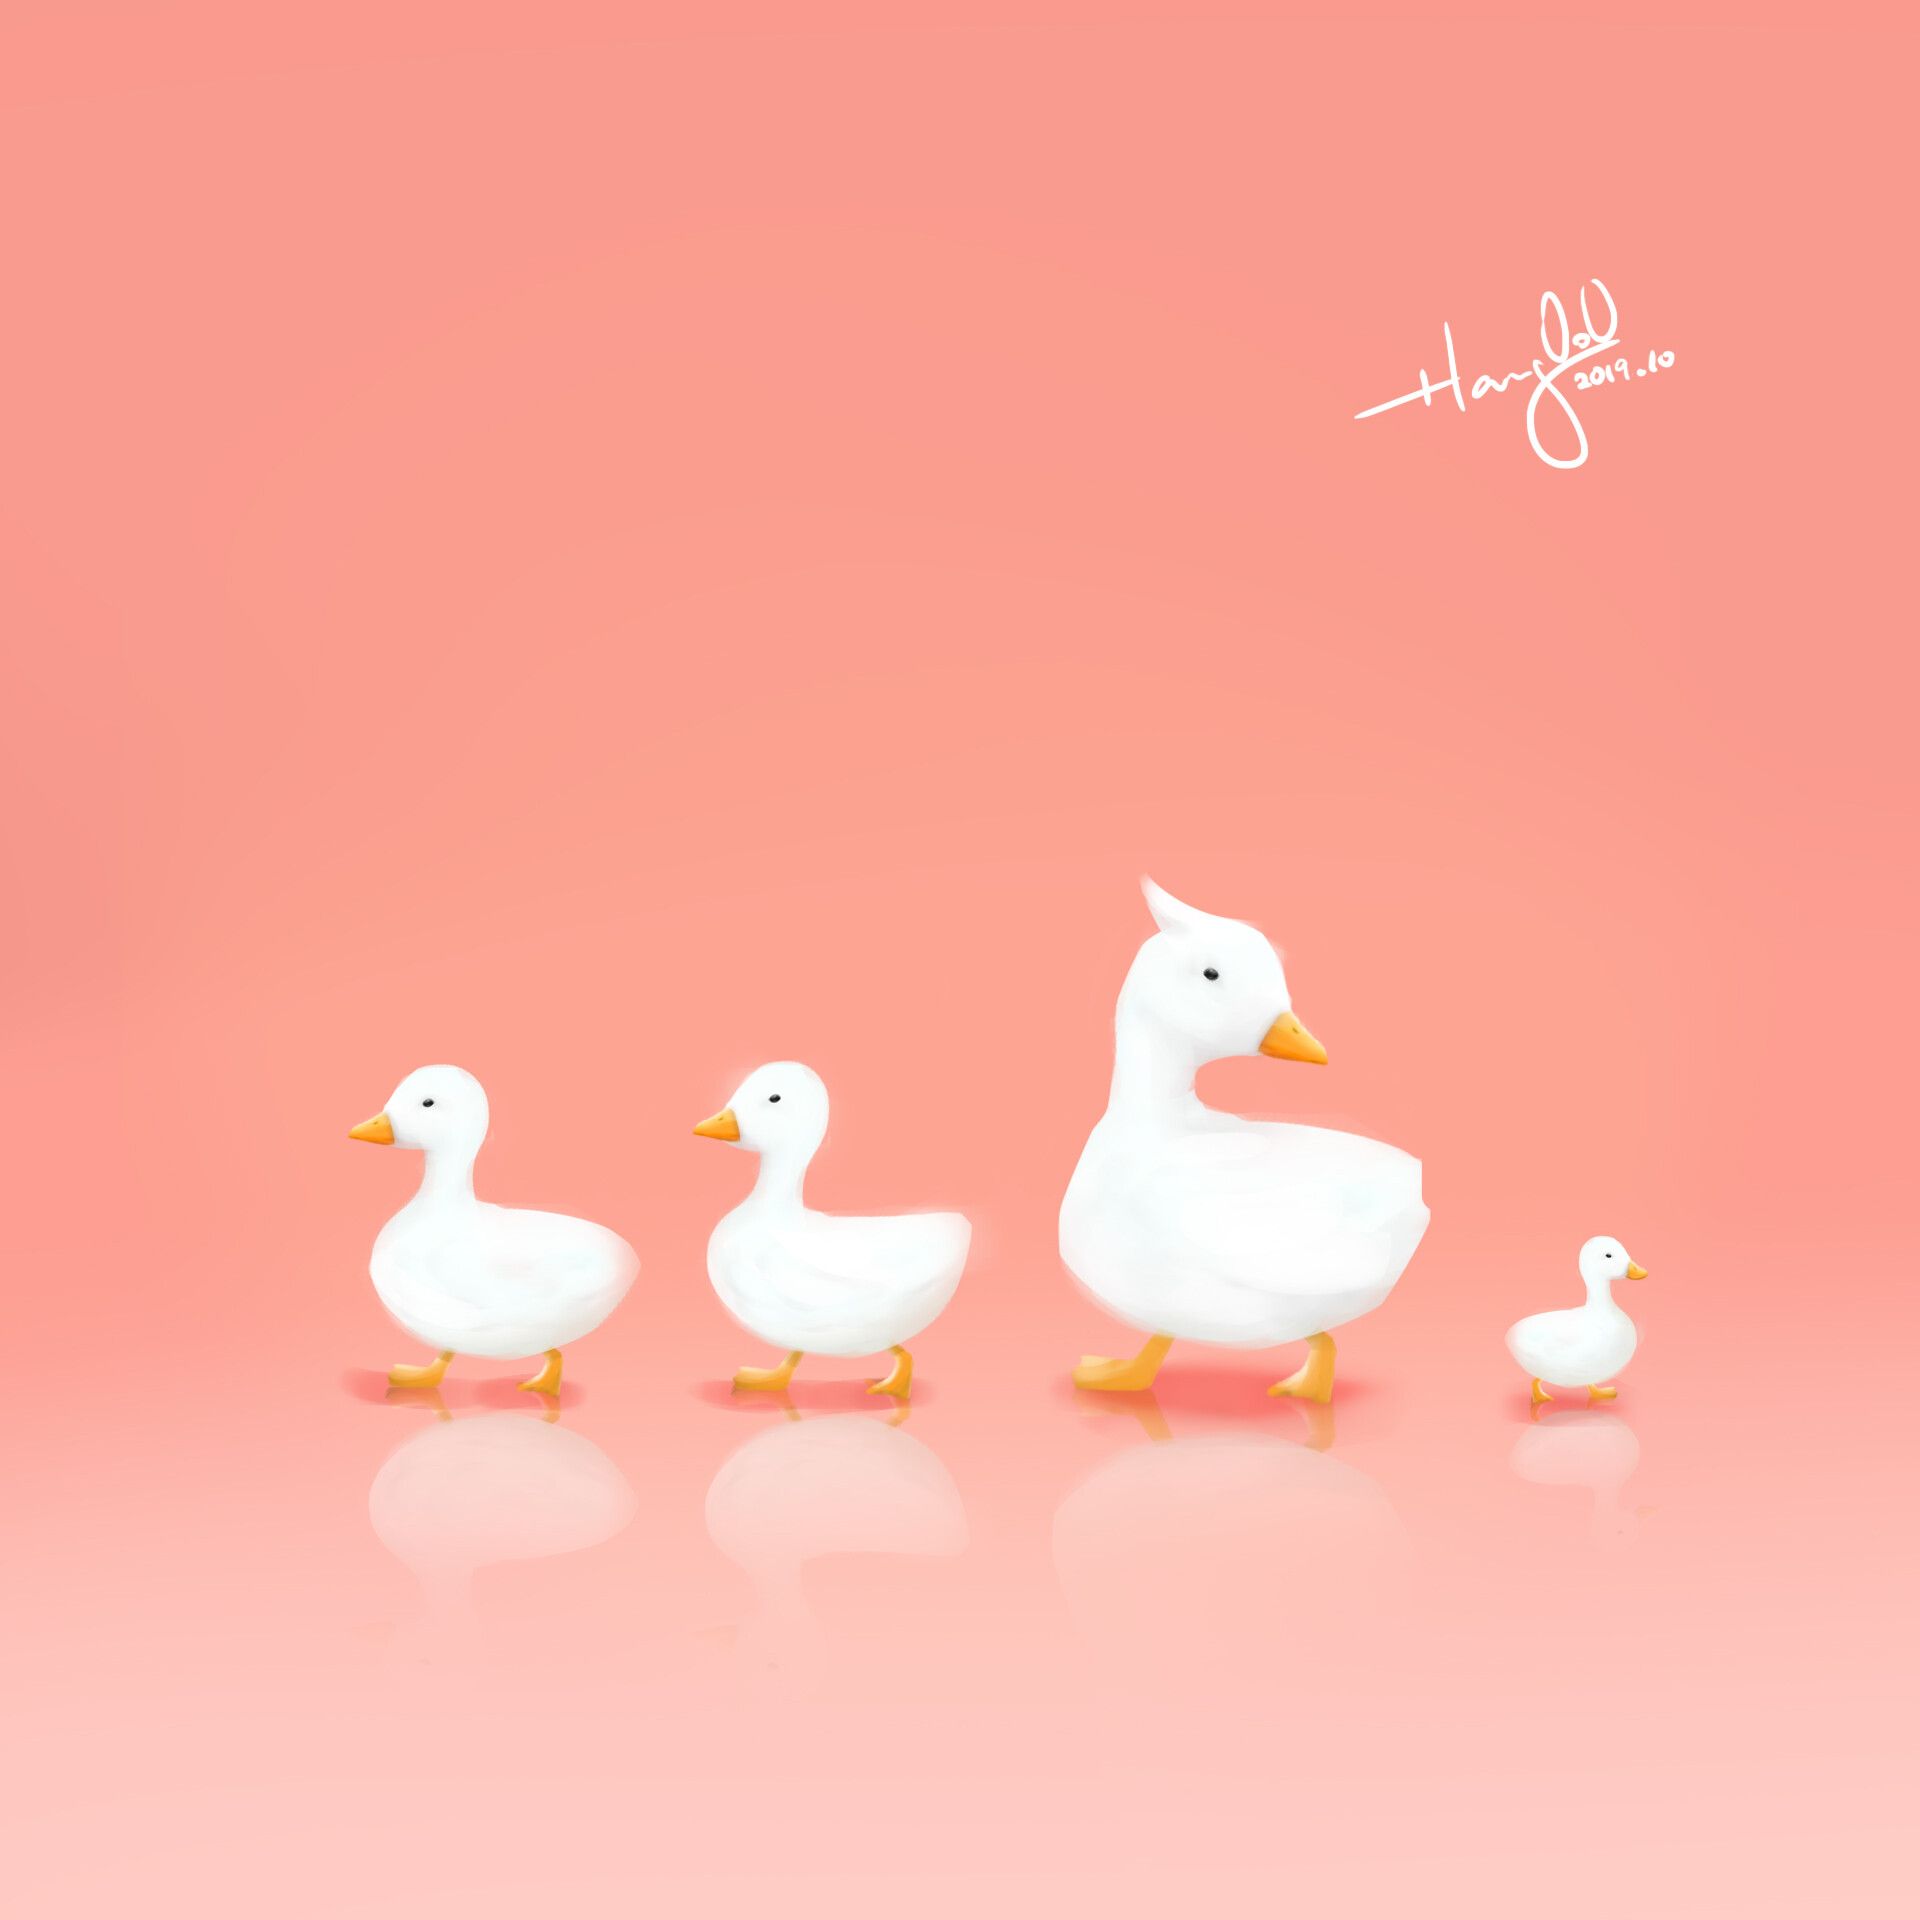 A family of four white ducks walking on a pink background - Duck